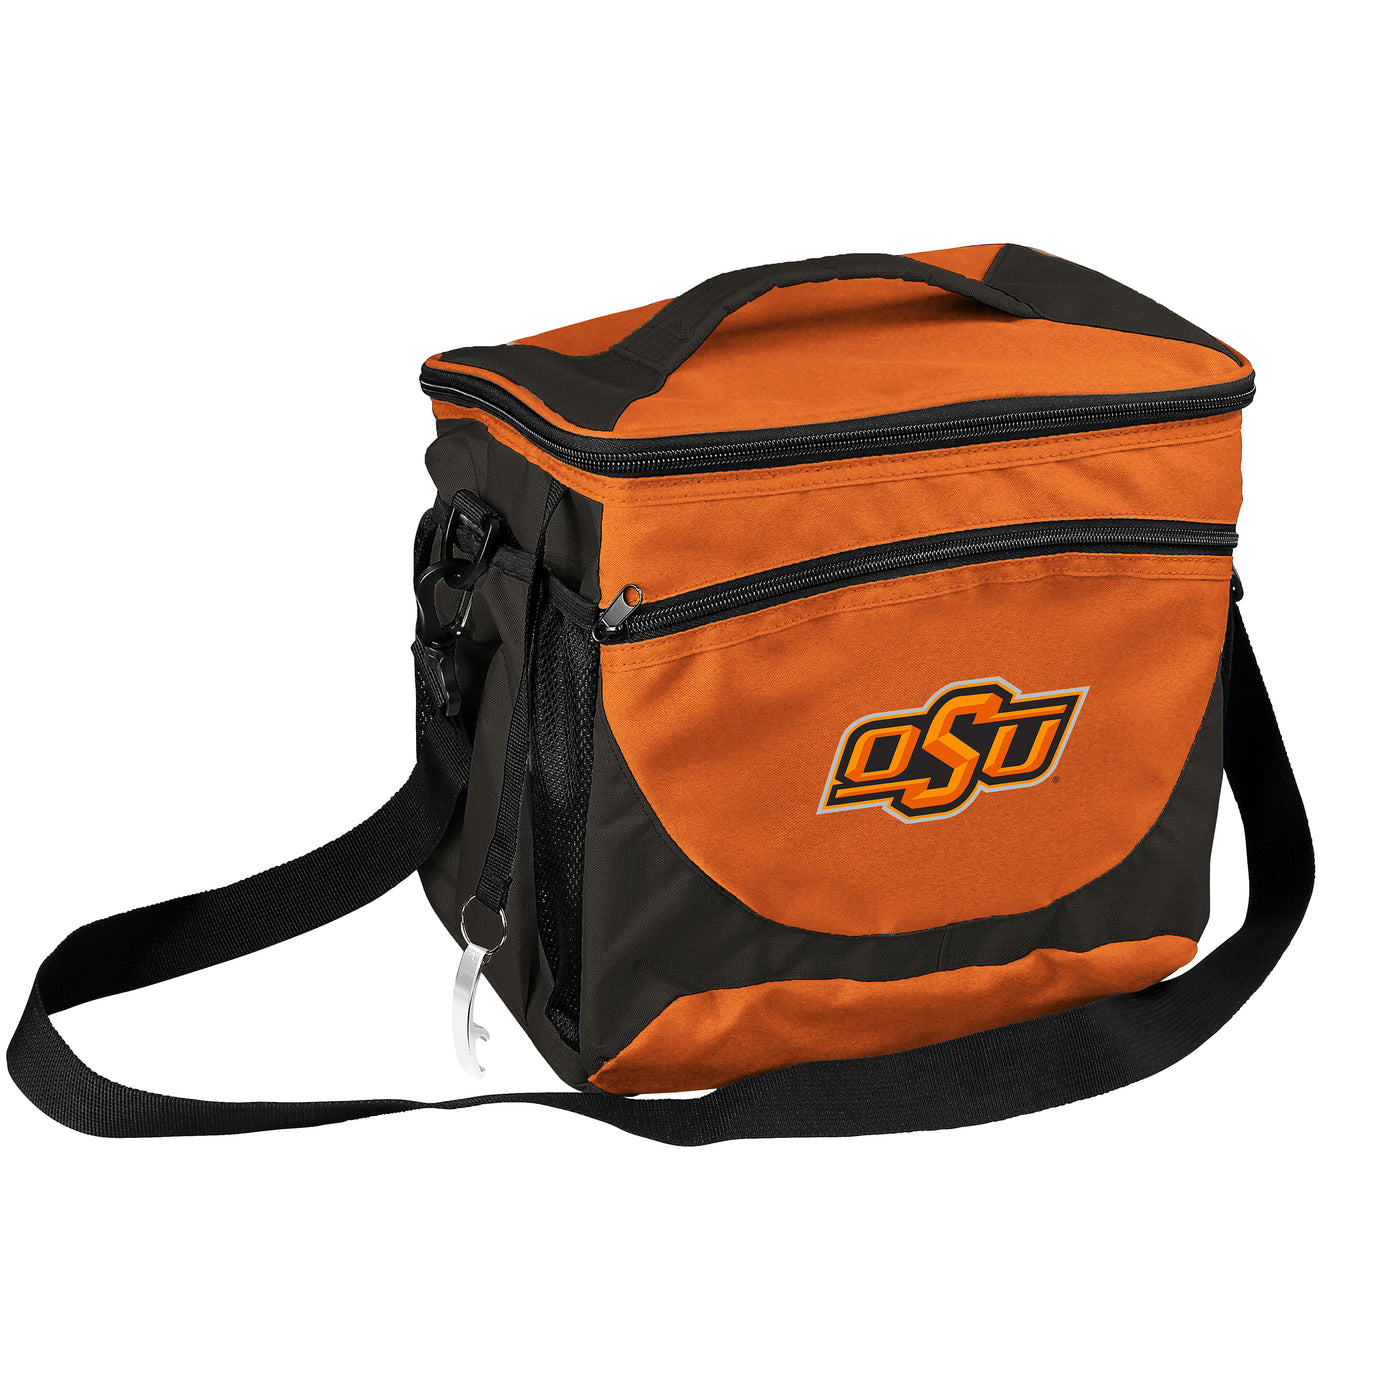 OK State 24 Can Cooler